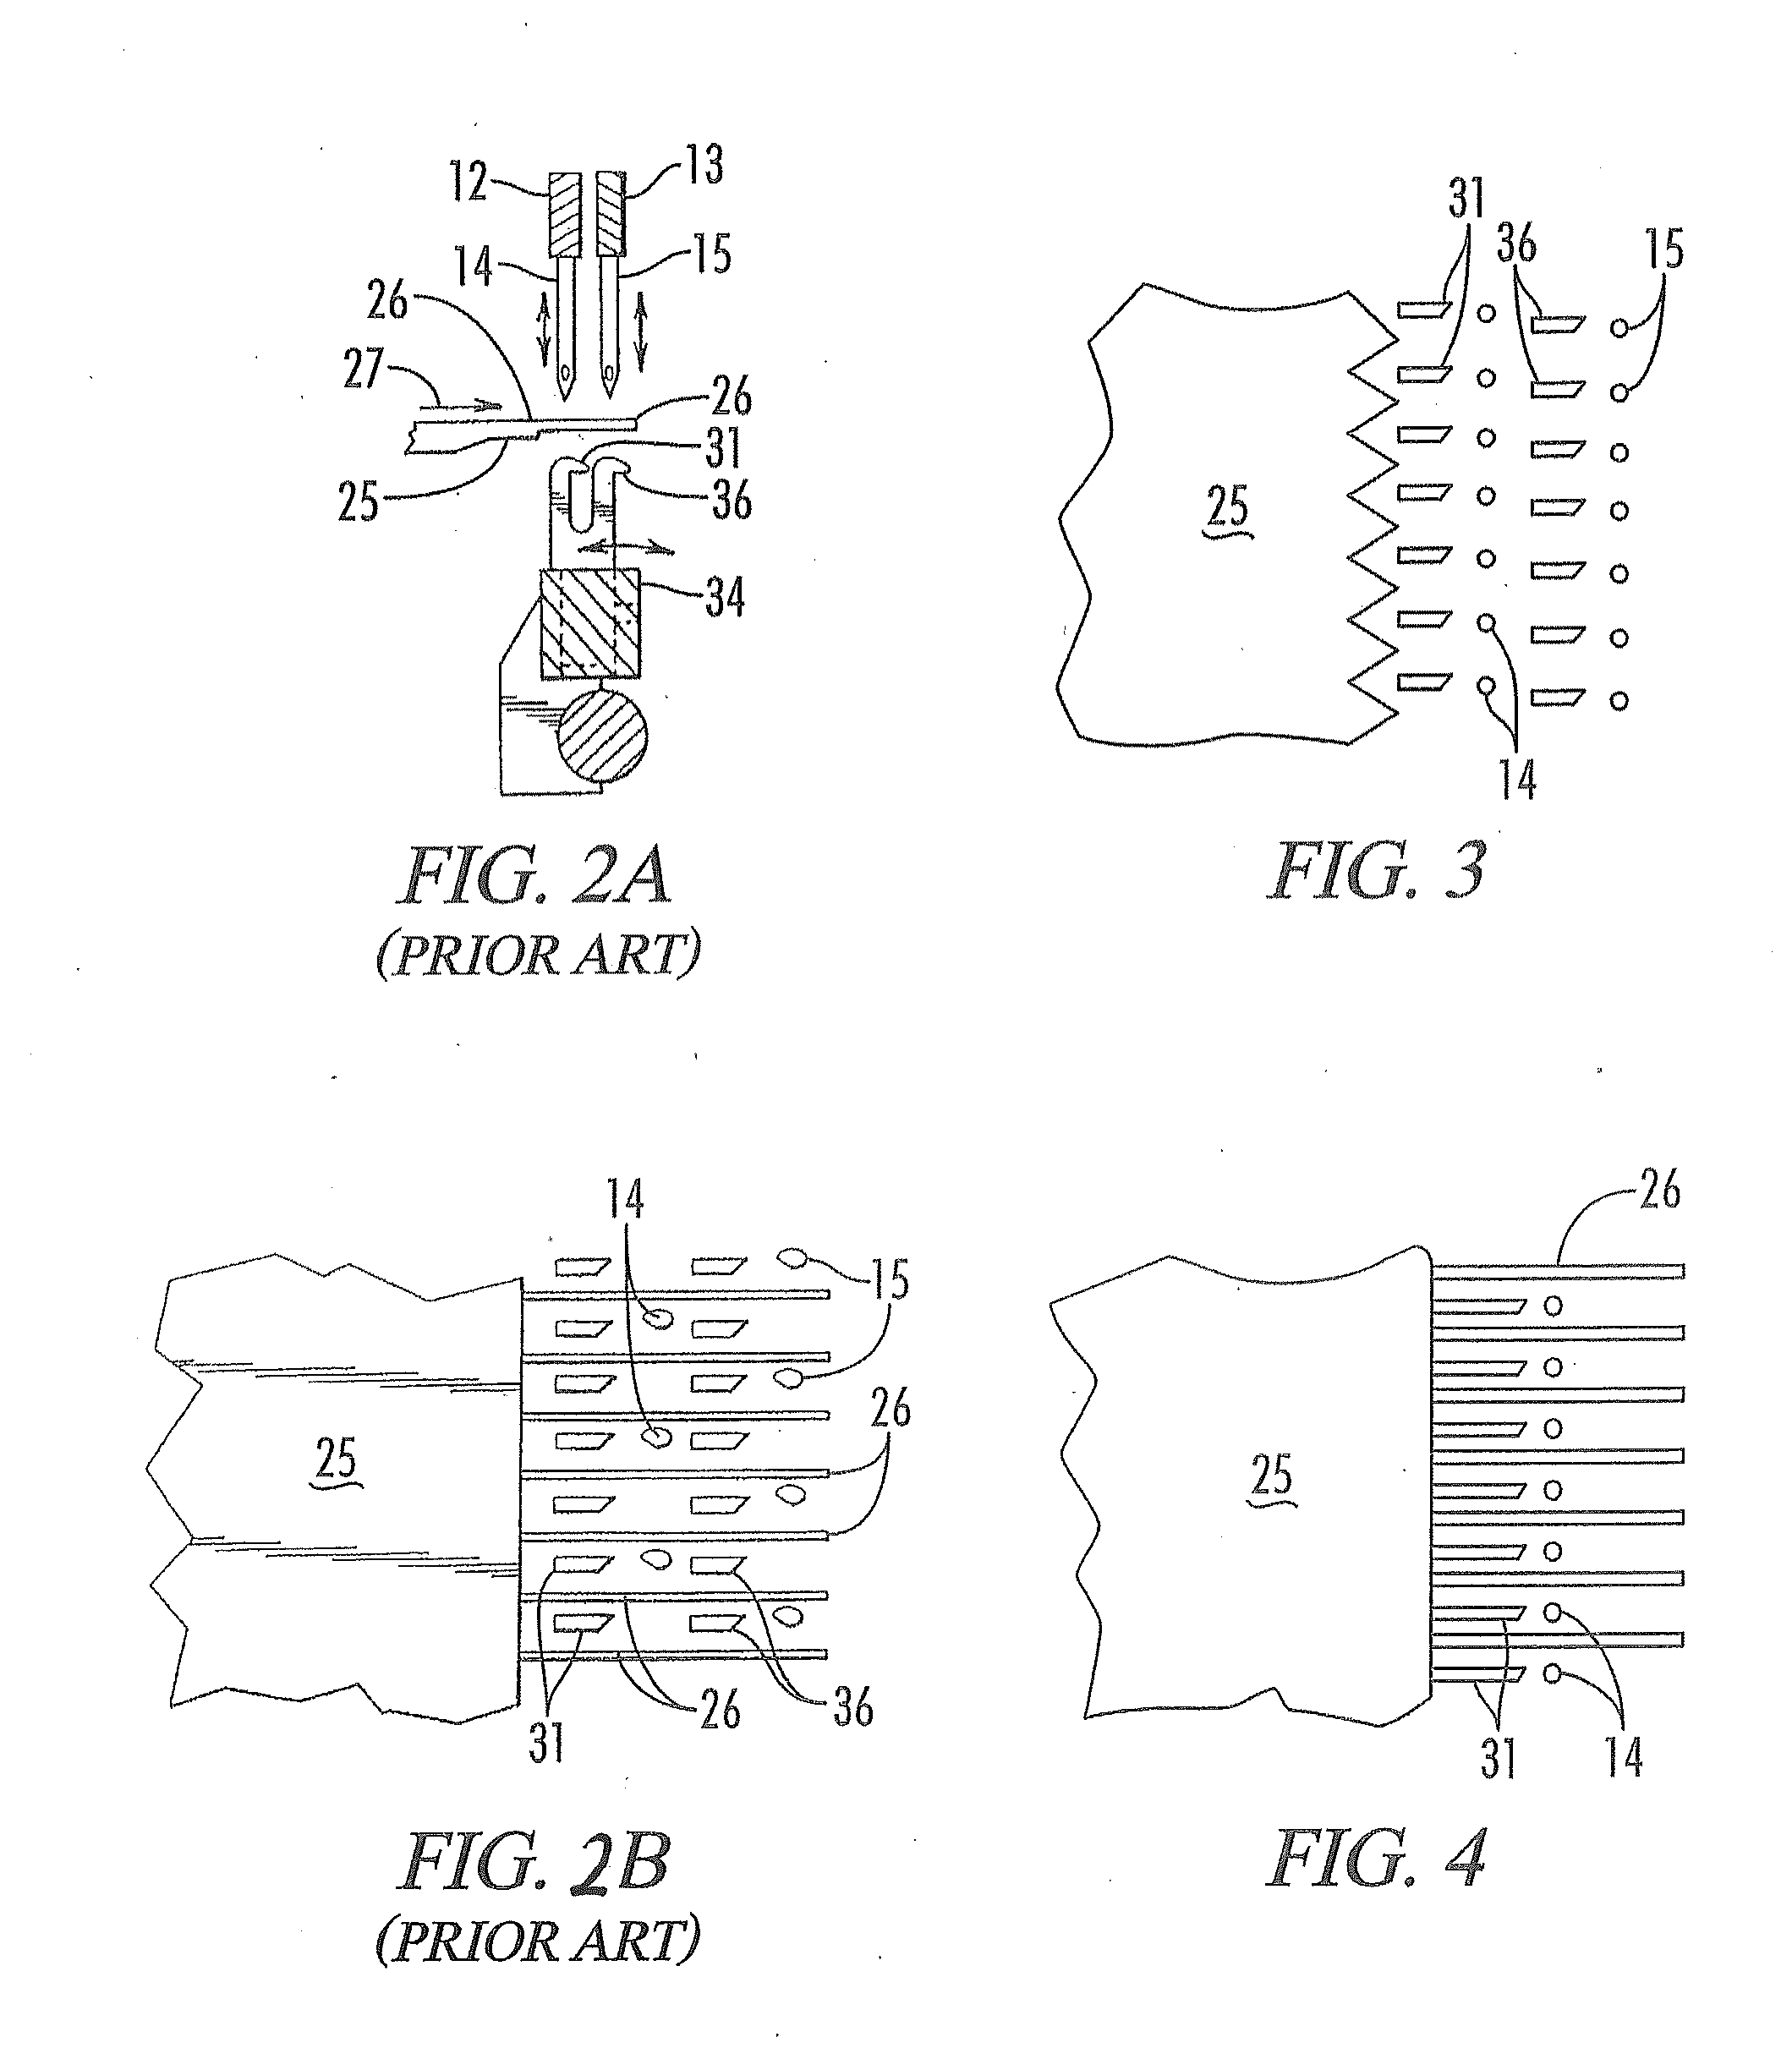 Method for Selective Display of Yarn in a Tufted Fabric with Offset Rows of Needles